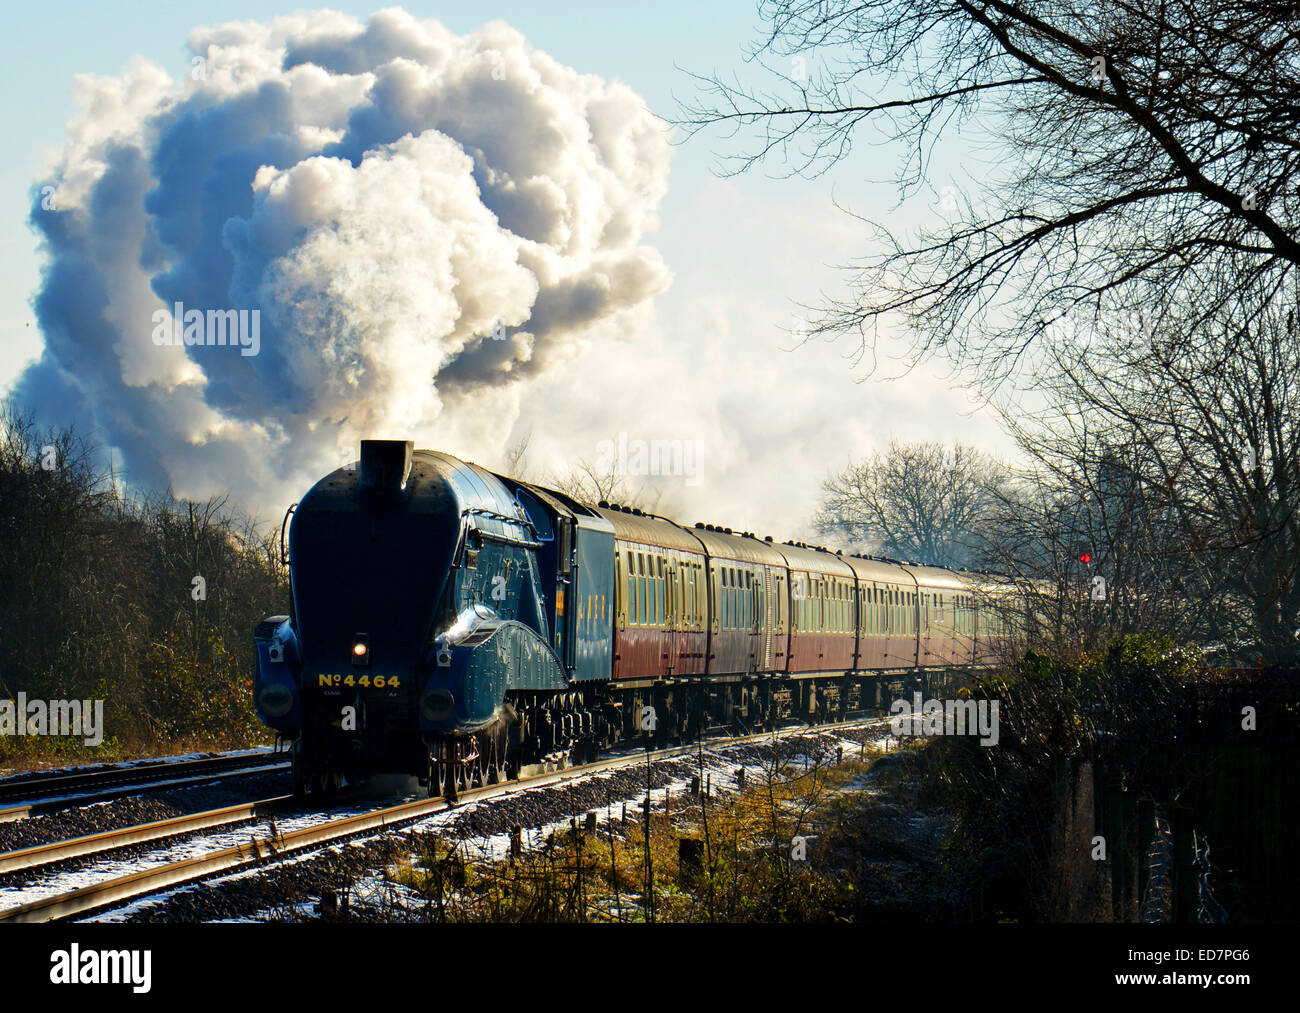 Bittern 4464 steam train passing through Spalding in Lincolnshire on journey between London King's Cross and Lincoln Stock Photo